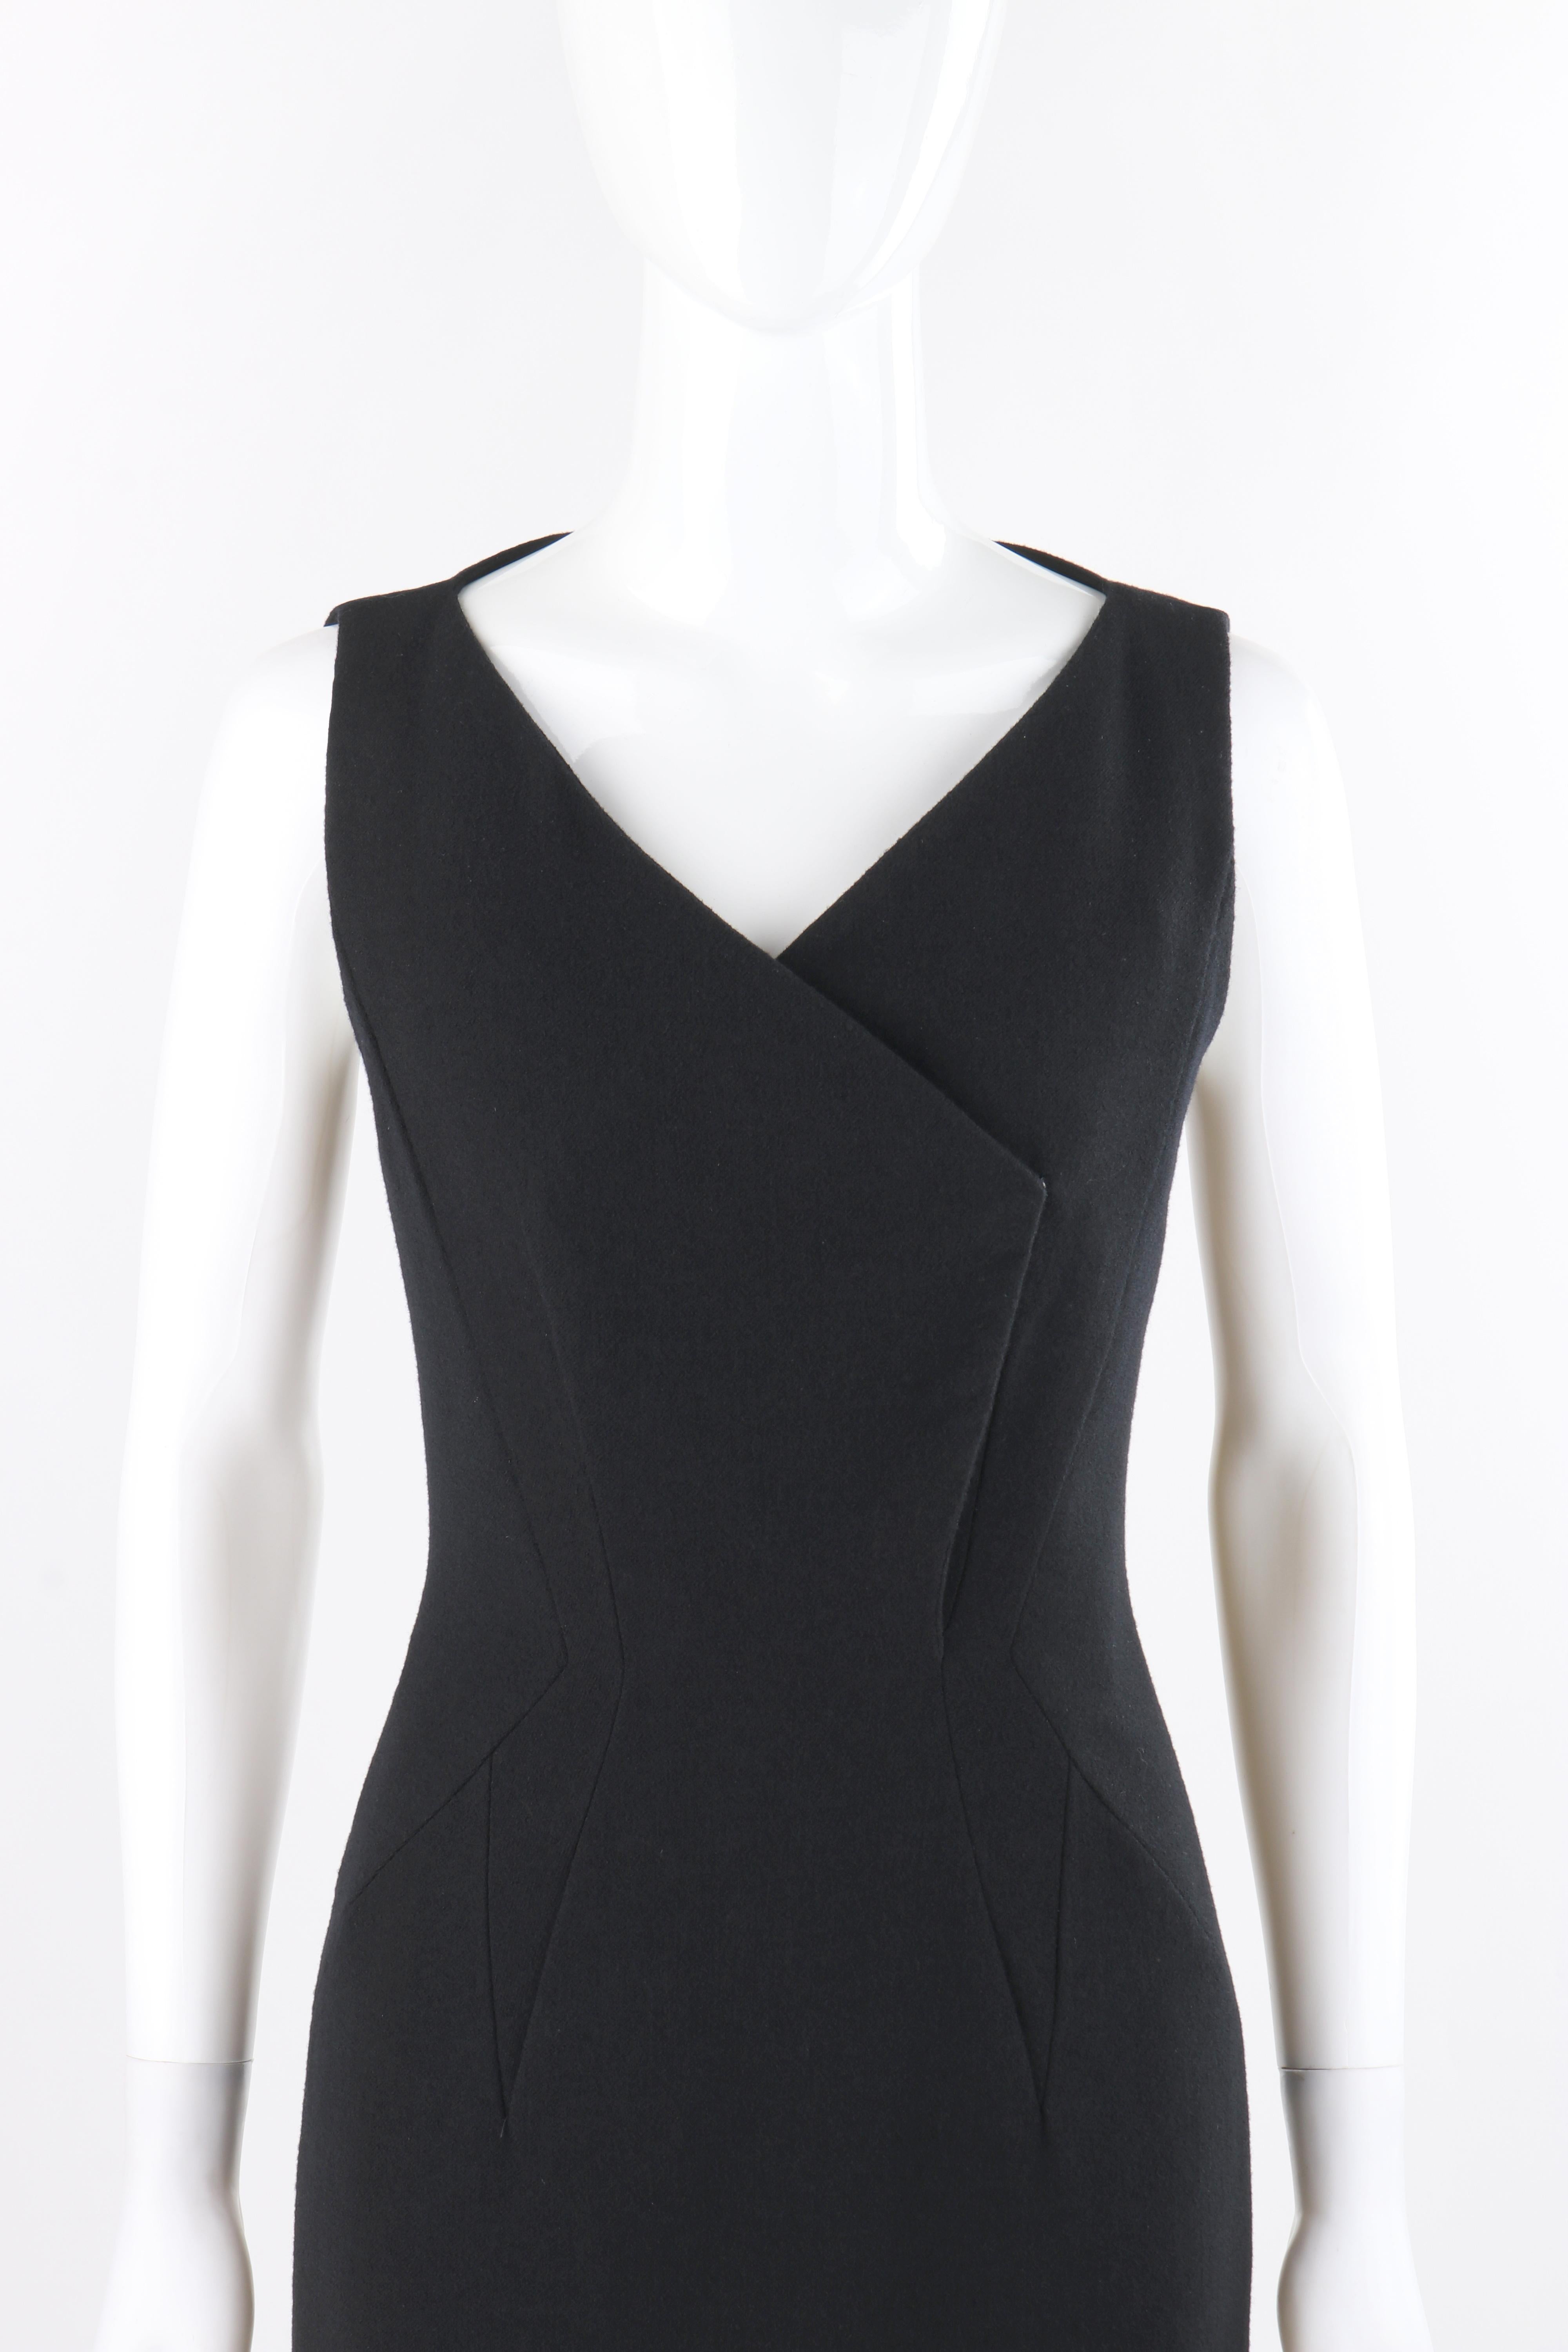 GIVENCHY c.2010's Black Tailored Geometric Panel Detail Sleeveless Sheath Dress
 
Brand / Manufacturer: Givenchy 
Circa: 2010’s
Style: Sleeveless sheath dress
Color(s): Black
Lined: Yes
Marked Fabric Content: “96% Wool, 4% elastane” (shell); “100%